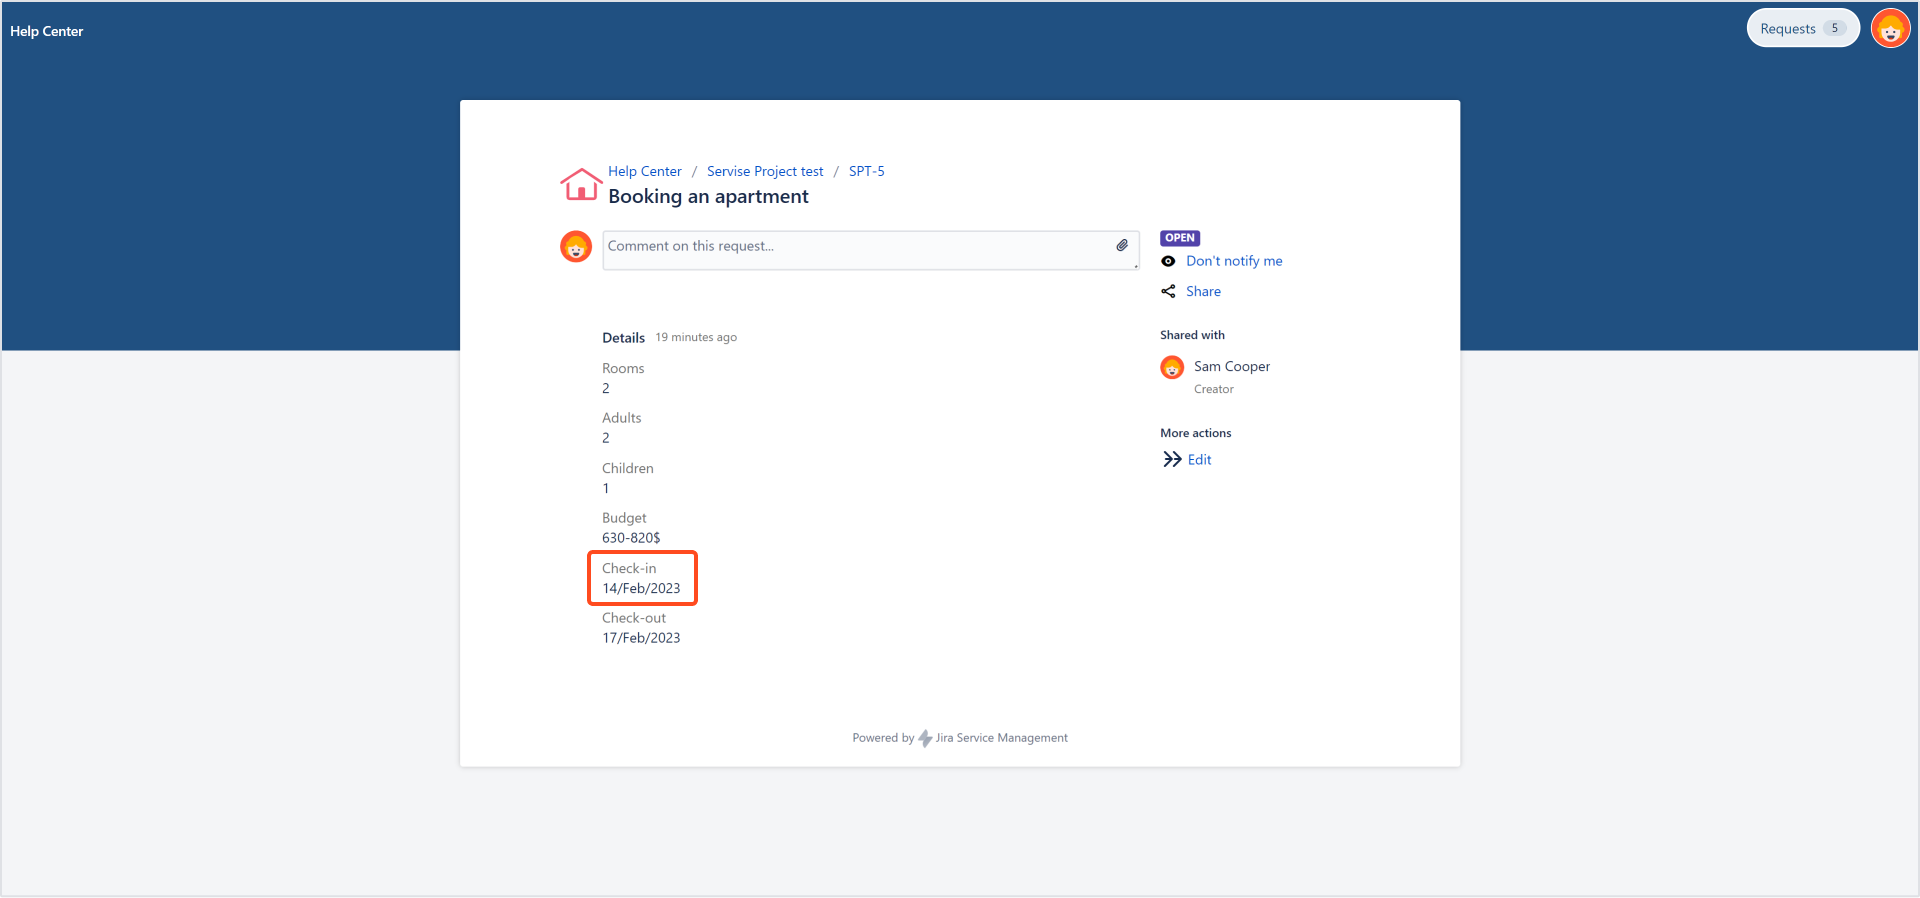 Now you can see editing information in the request detail view with Actions for Jira Service Management